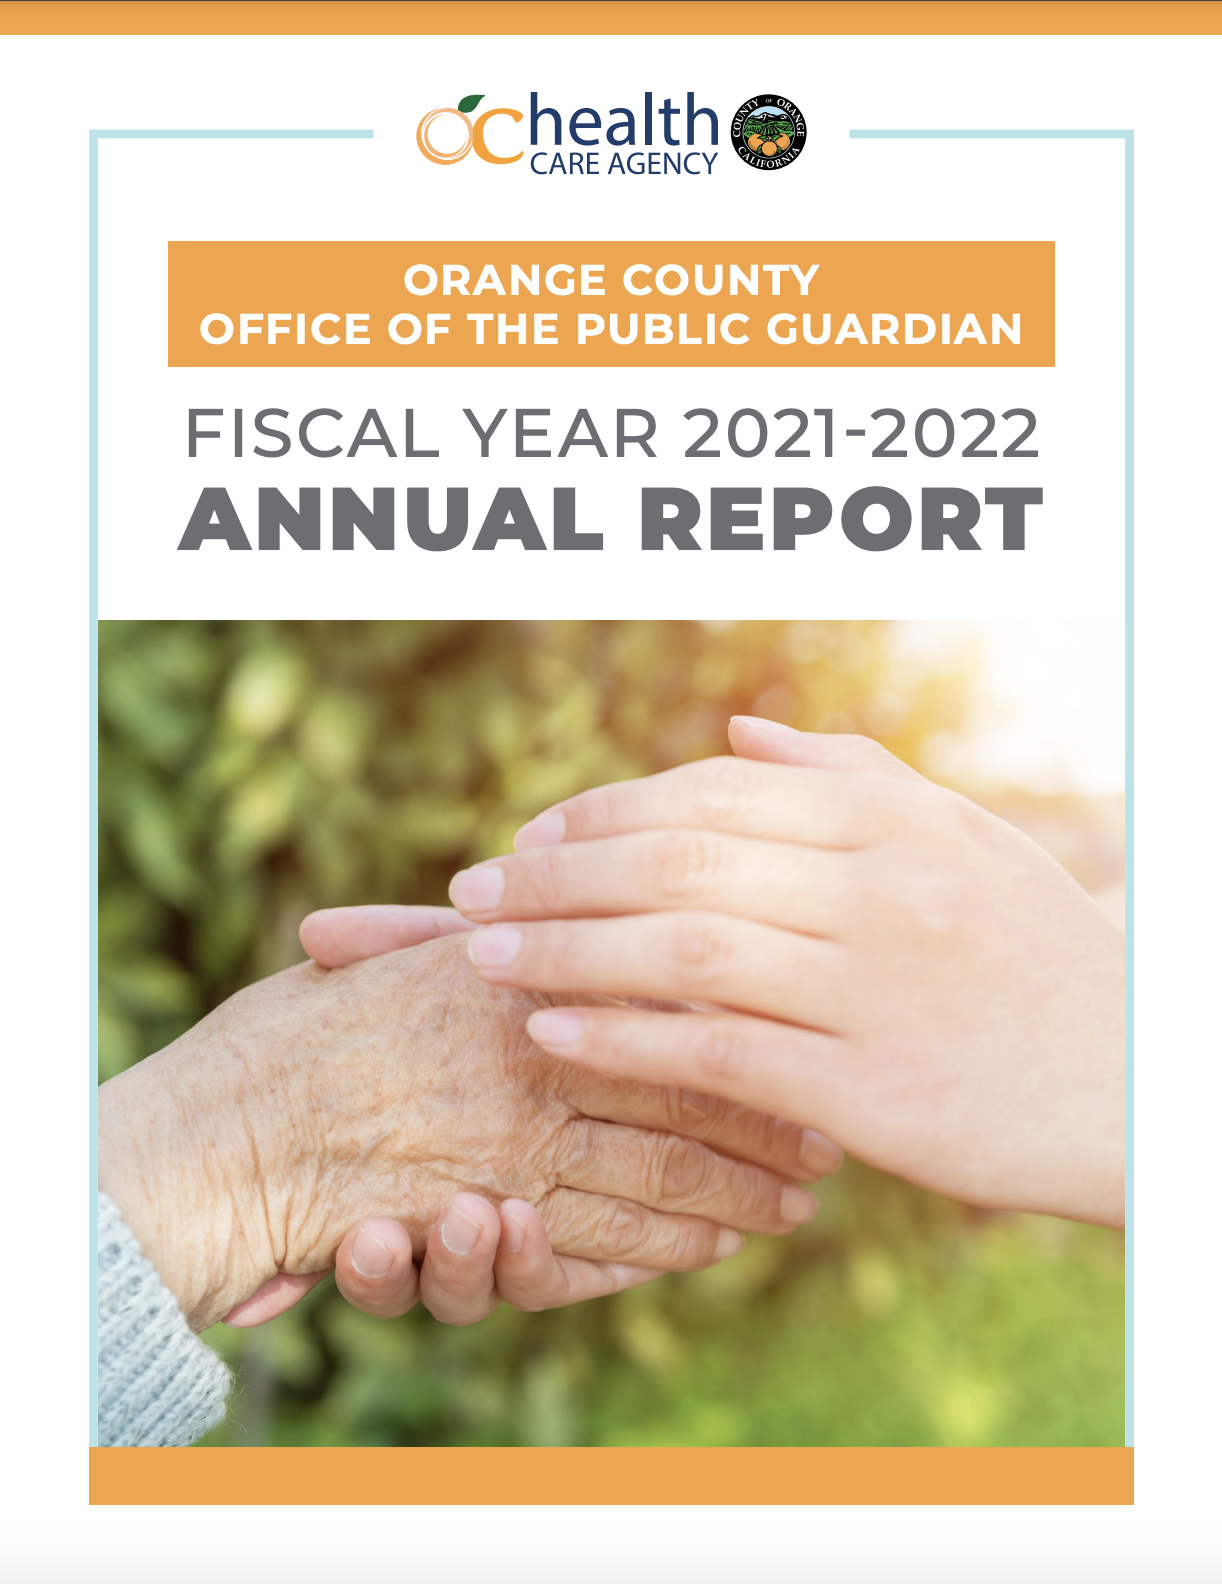 Orange County Office of the Public Guardian, 2021-2022